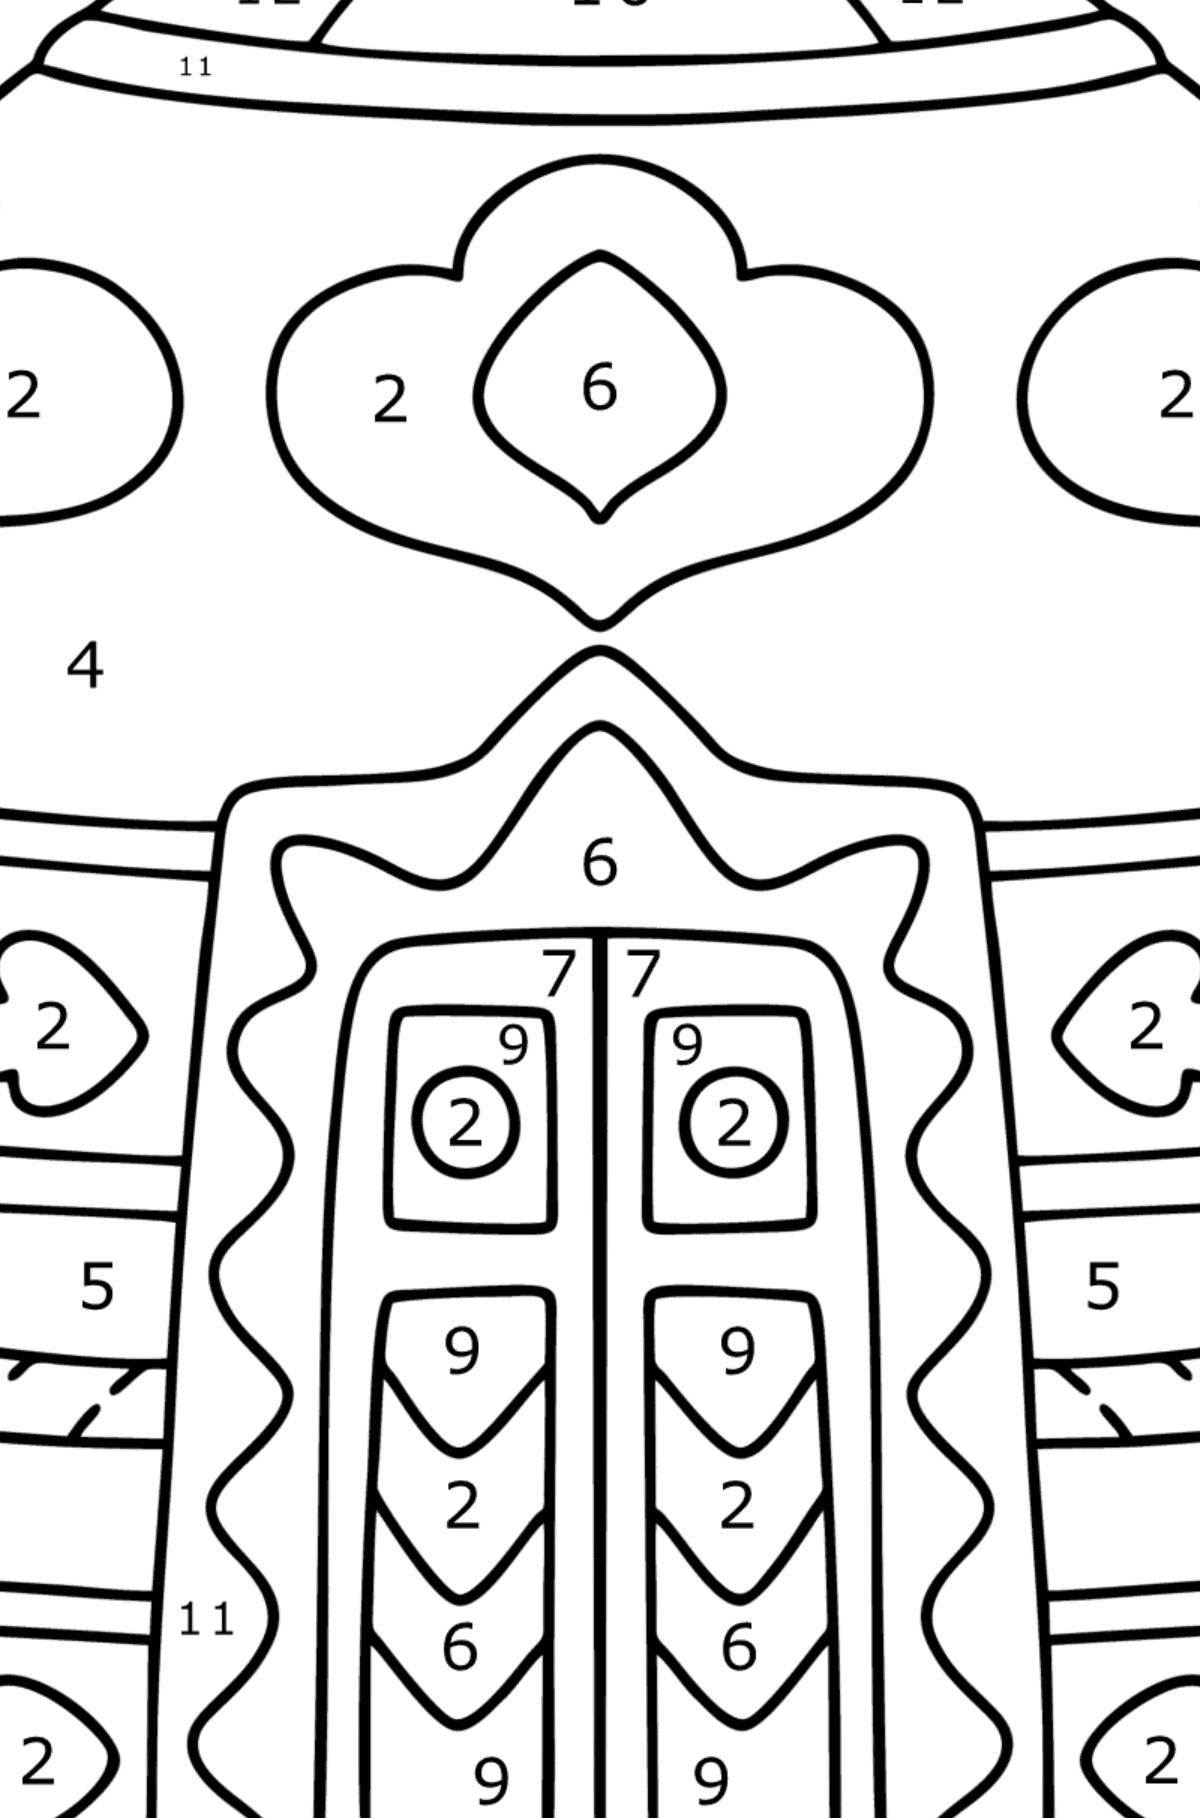 Yurt of nomad coloring page - Coloring by Numbers for Kids